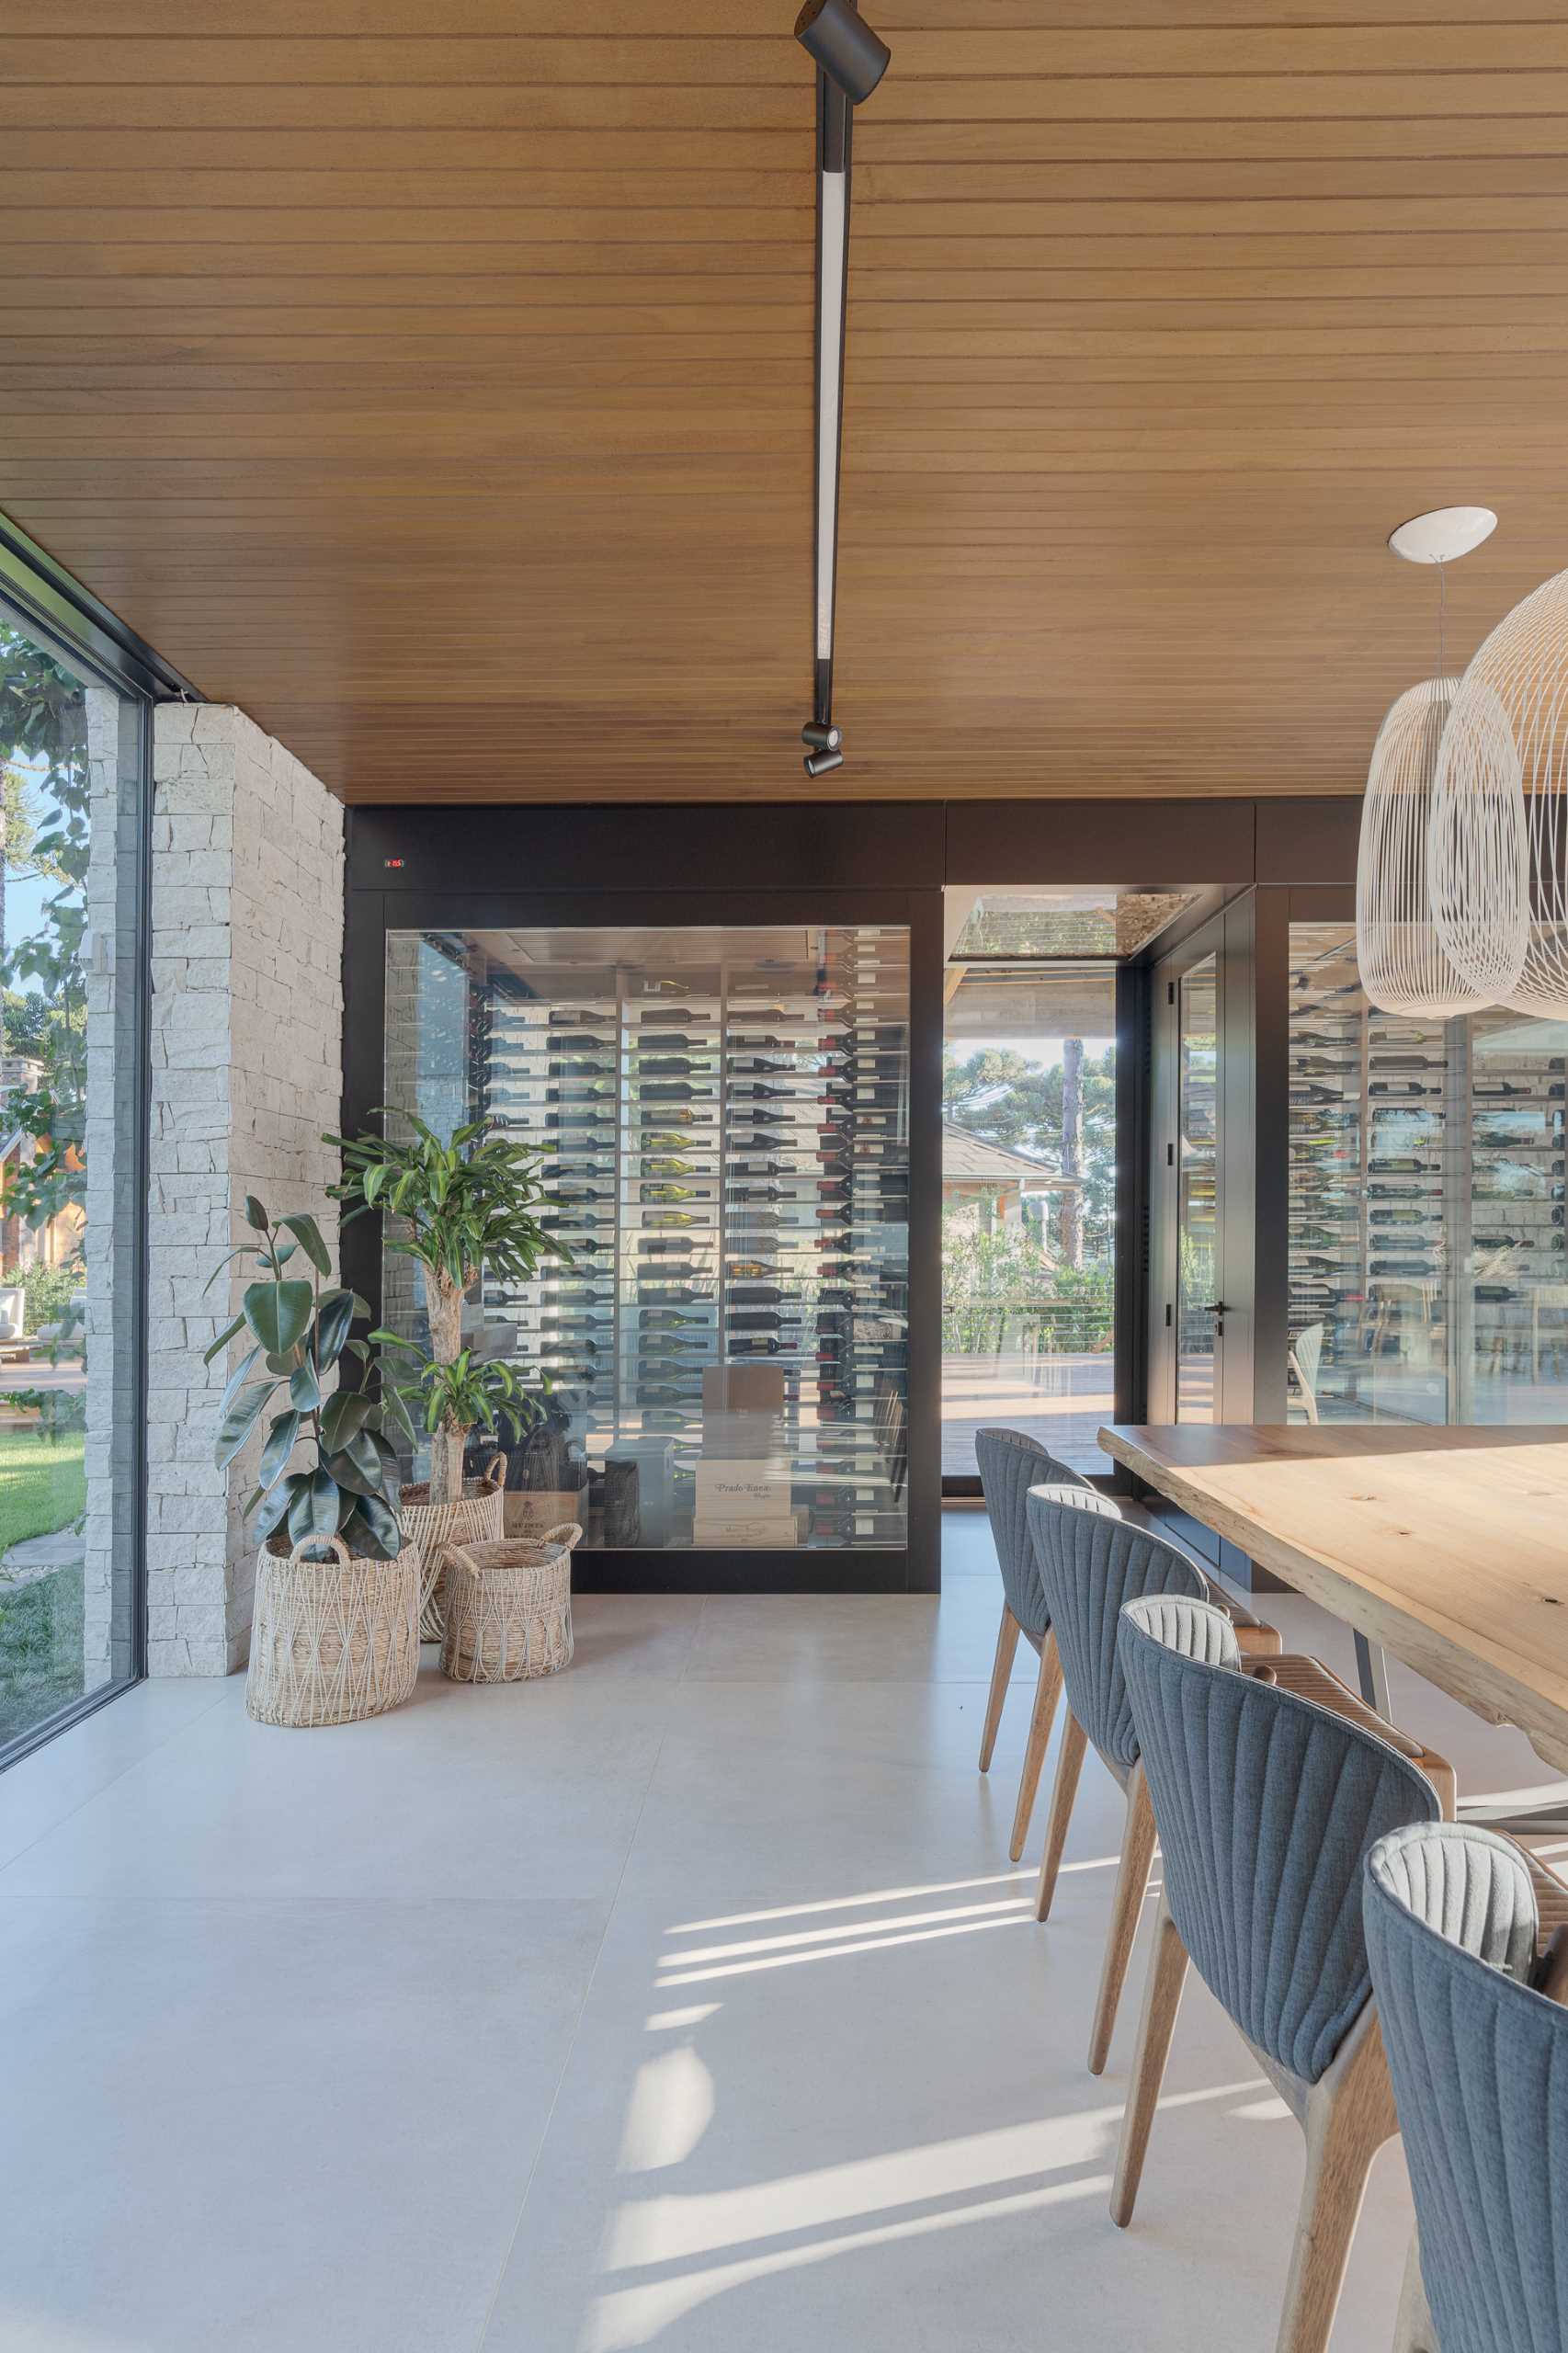 A modern dining area with a long wood table connected to the kitchen island. Dark grey chairs provide a contrasting element, while the wall at the end of the table is dedicated to a pair of glass enclosed wine cellars.